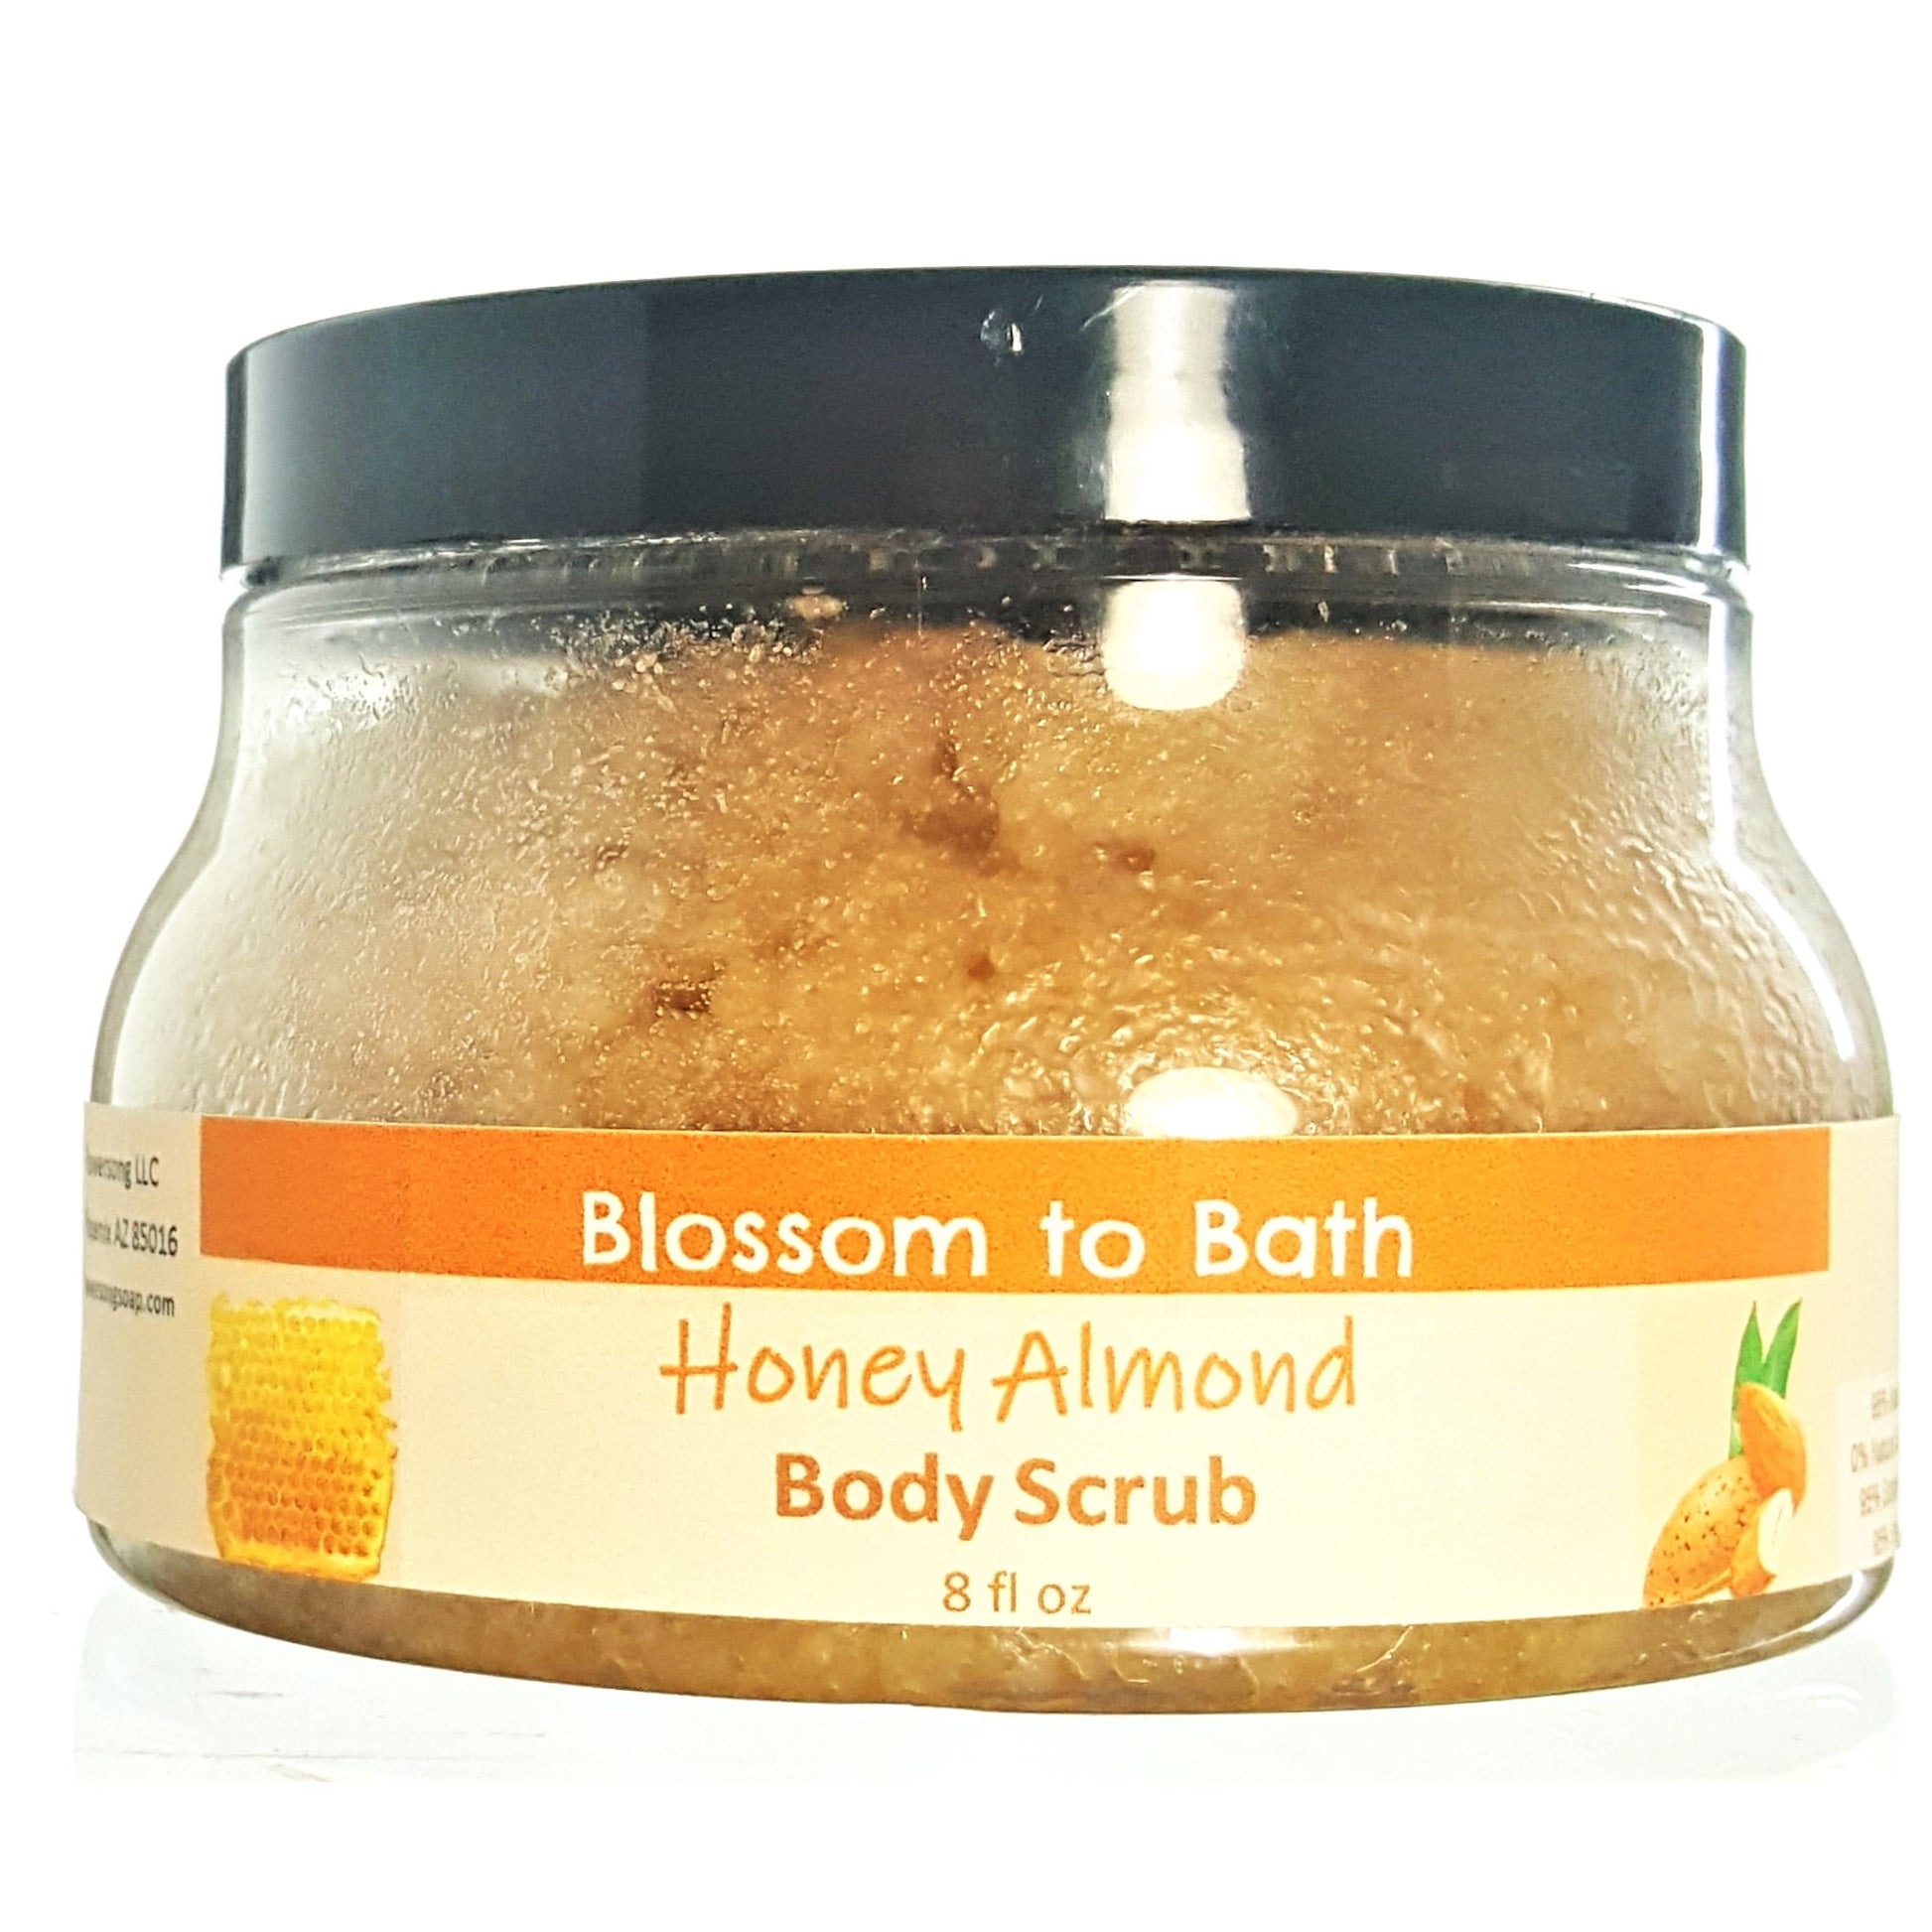 Buy Blossom to Bath Honey Almond Body Scrub from Flowersong Soap Studio.  Large crystal turbinado sugar plus  rich oils conveniently exfoliate and moisturize in one step  Sweetly fragrant nutty almond drizzled with honey.